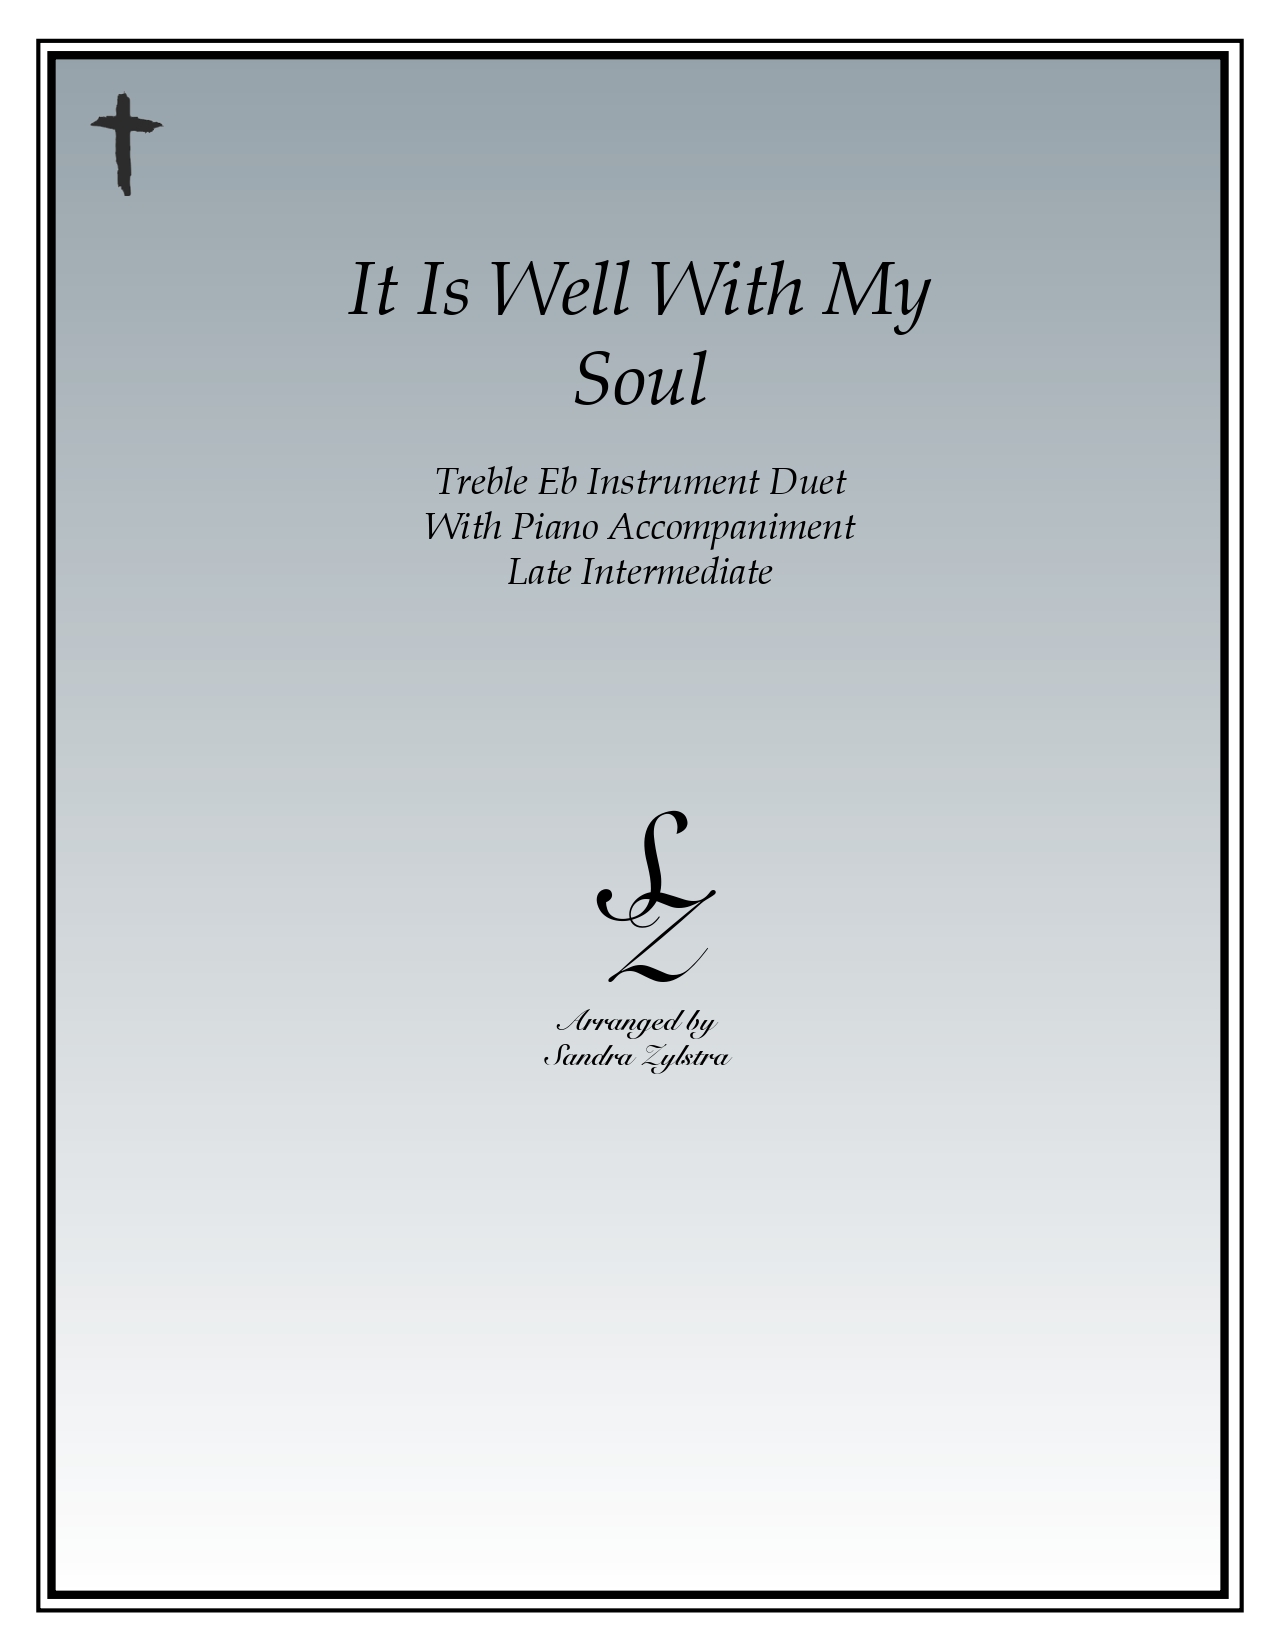 It Is Well With My Soul Eb instrument duet parts cover page 00011